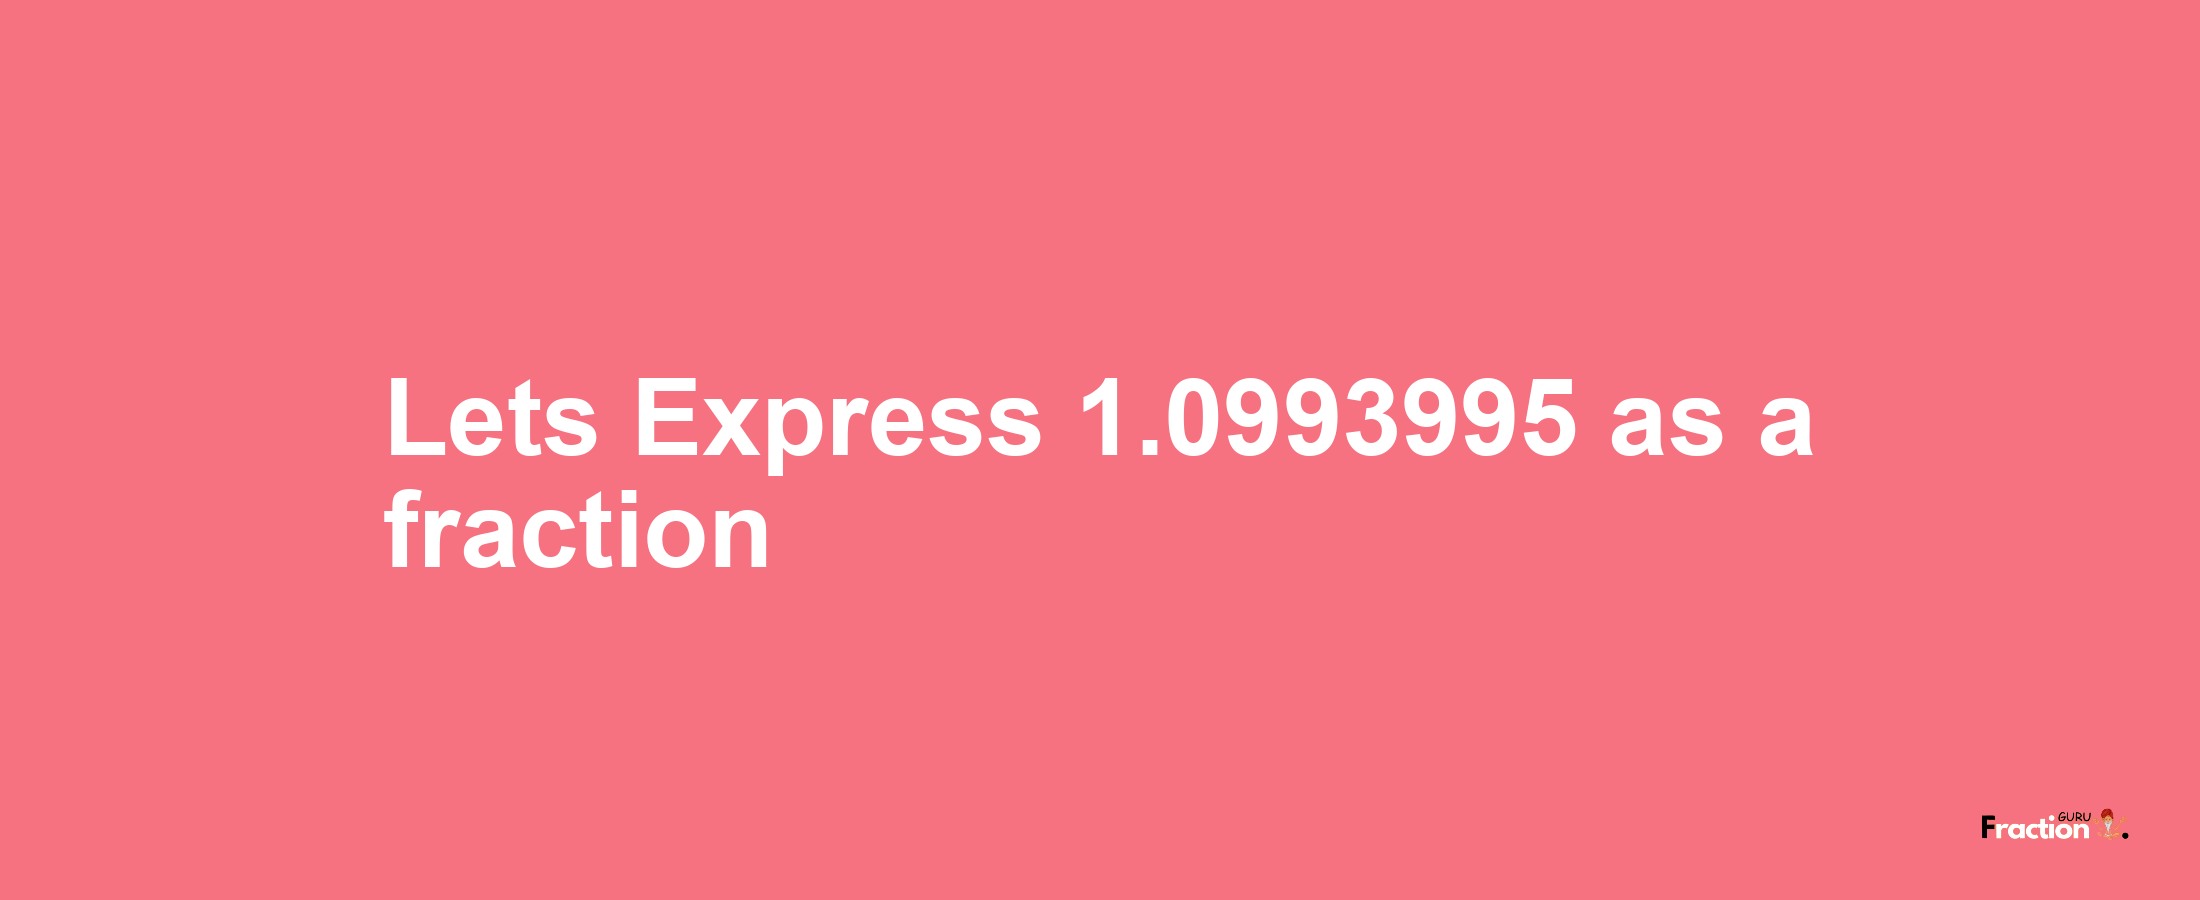 Lets Express 1.0993995 as afraction